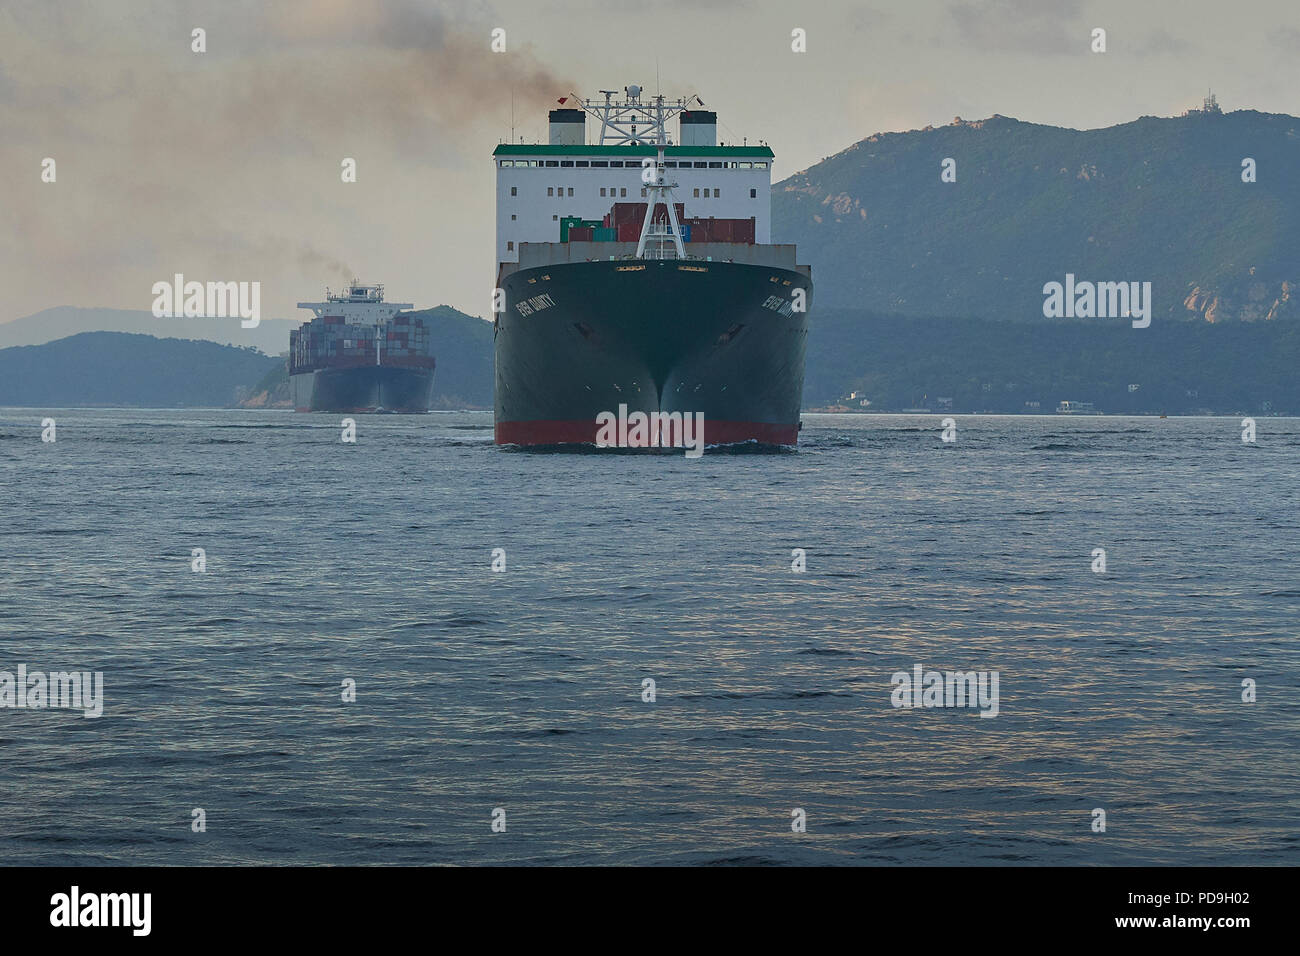 Evergreen Container Ship, EVER DAINTY, In The Busy East Lamma Shipping Channel, Heading For The Kwai Tsing Container Terminal, Hong Kong. Stock Photo